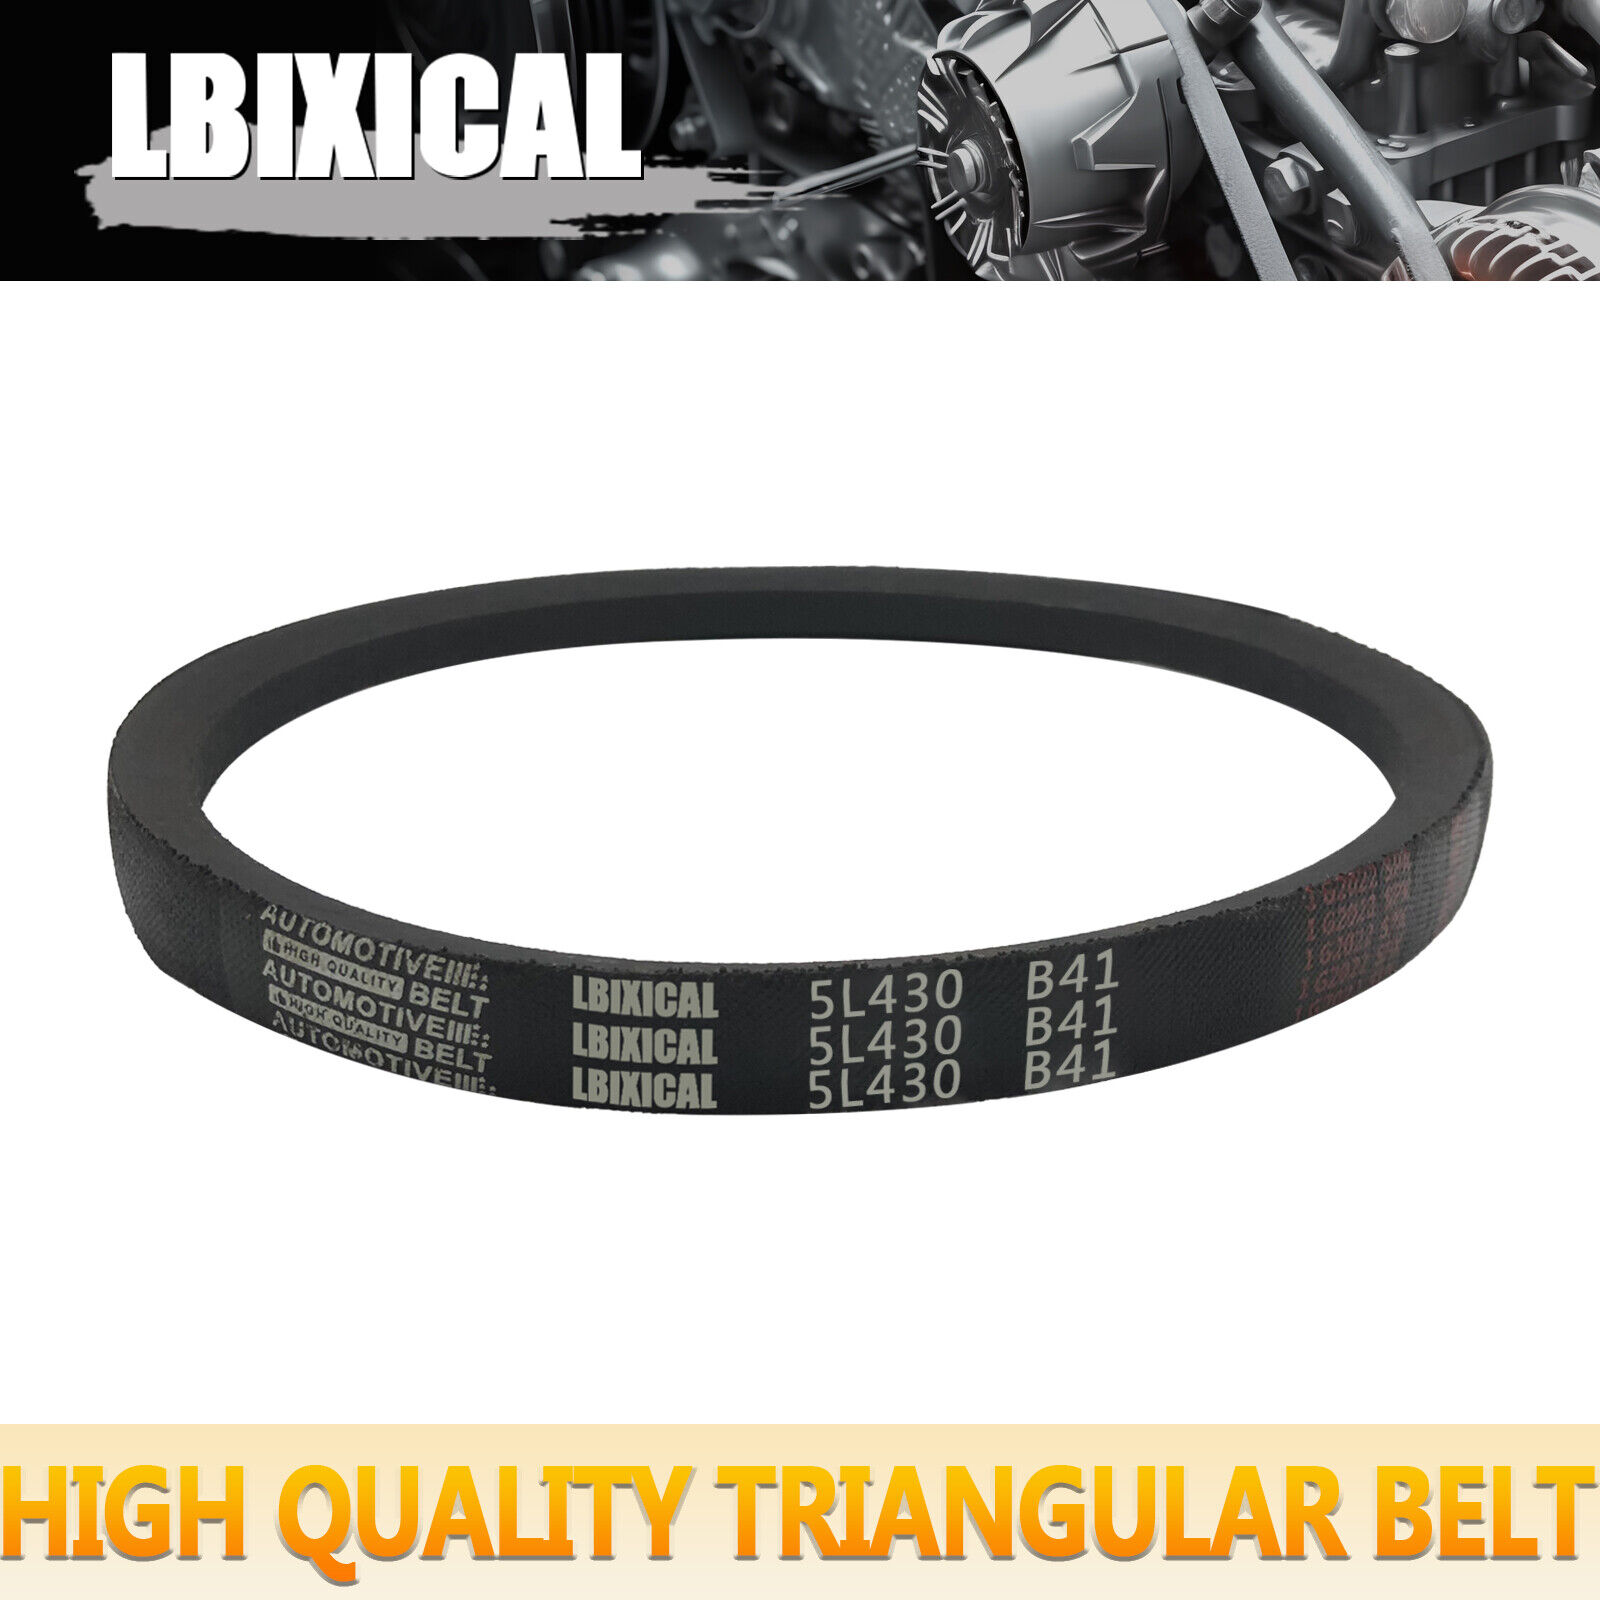 LBIXICAL Replacement Vbelt 5L430 5/8 x 43in V-belt  NEW